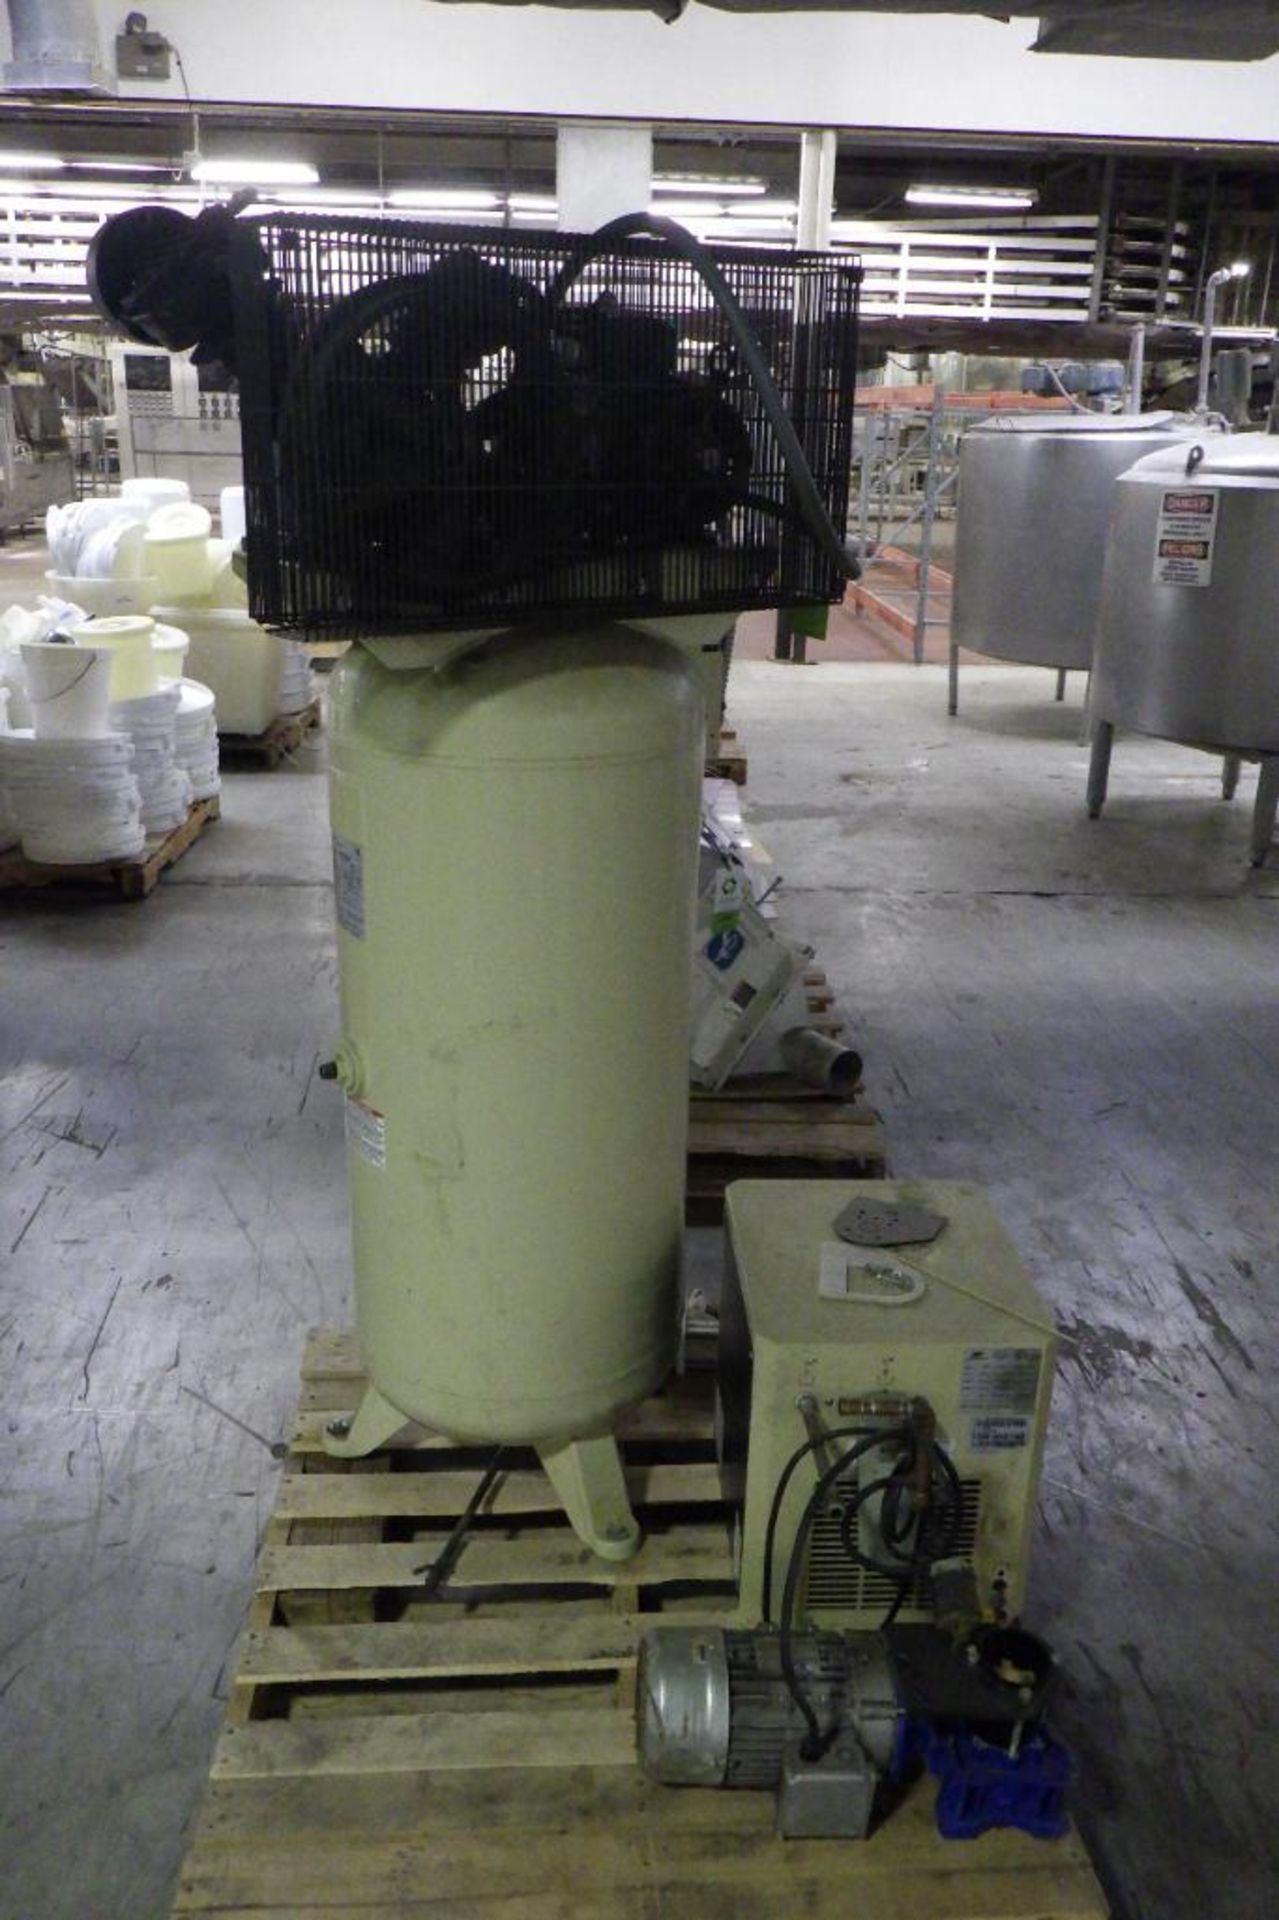 Ingersoll rand air compressor with dryer - Image 4 of 12